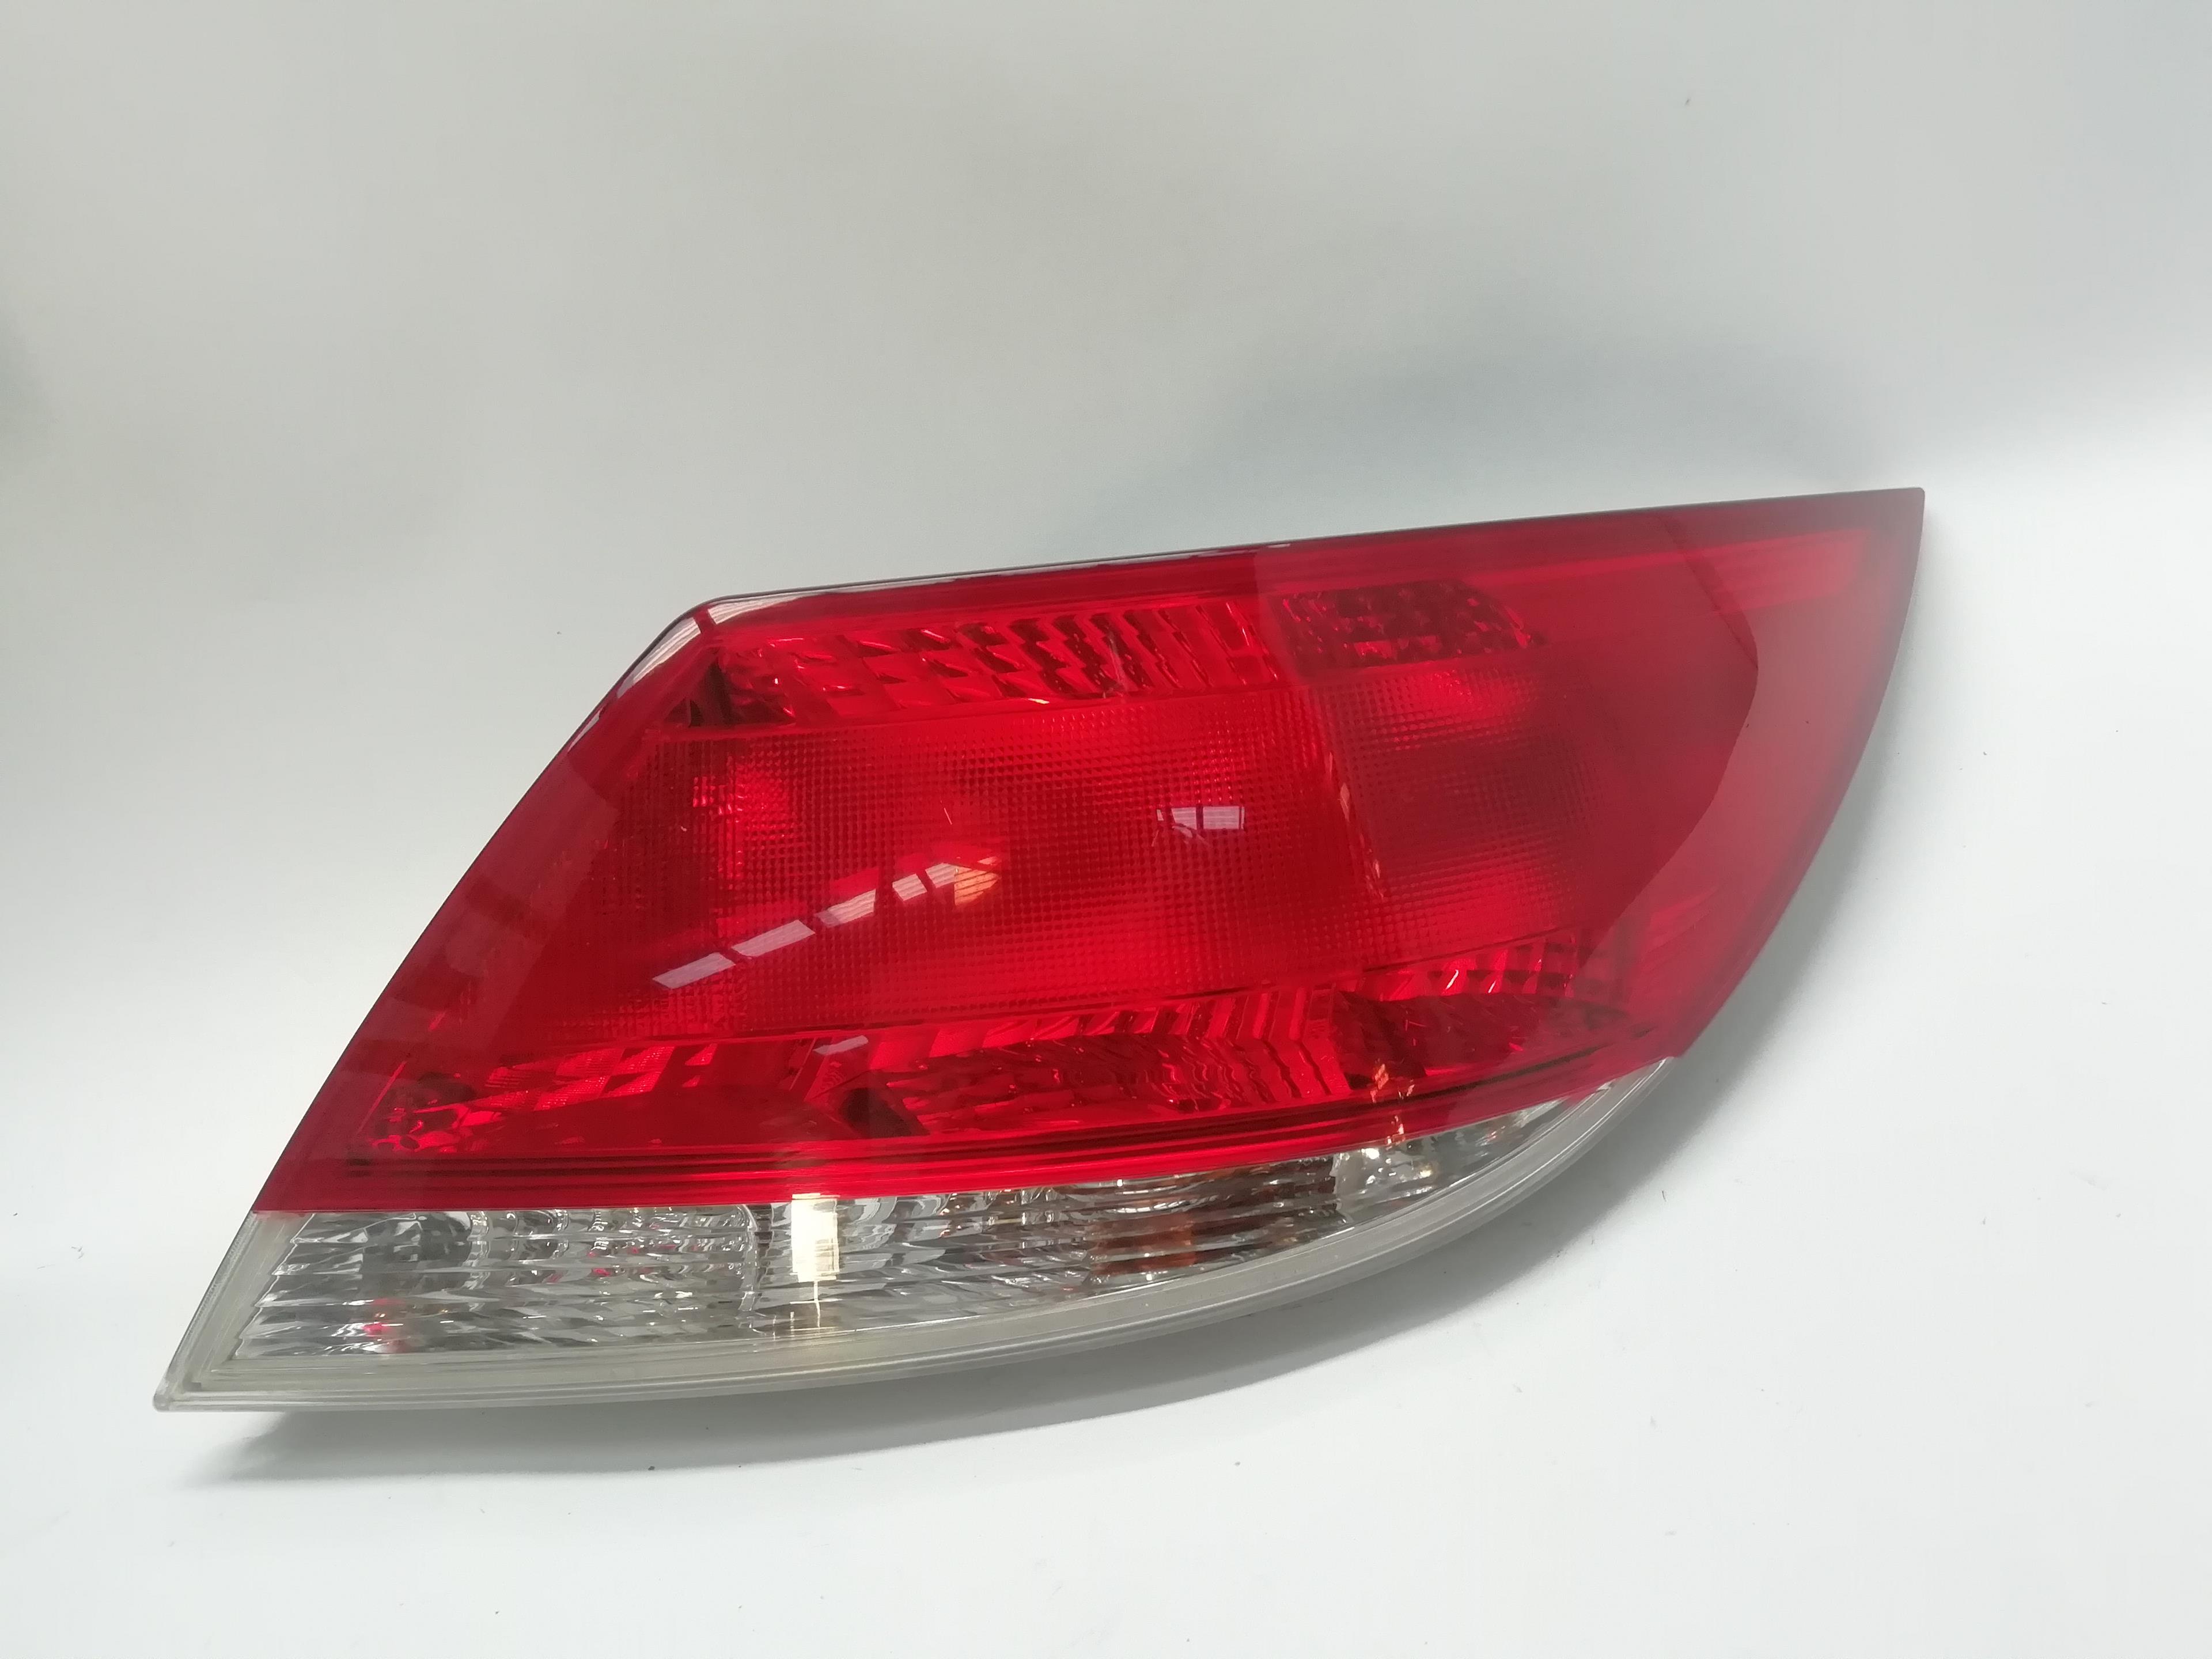 OPEL Astra H (2004-2014) Rear Right Taillight Lamp 13273302, 1222367, 93192473 22966379